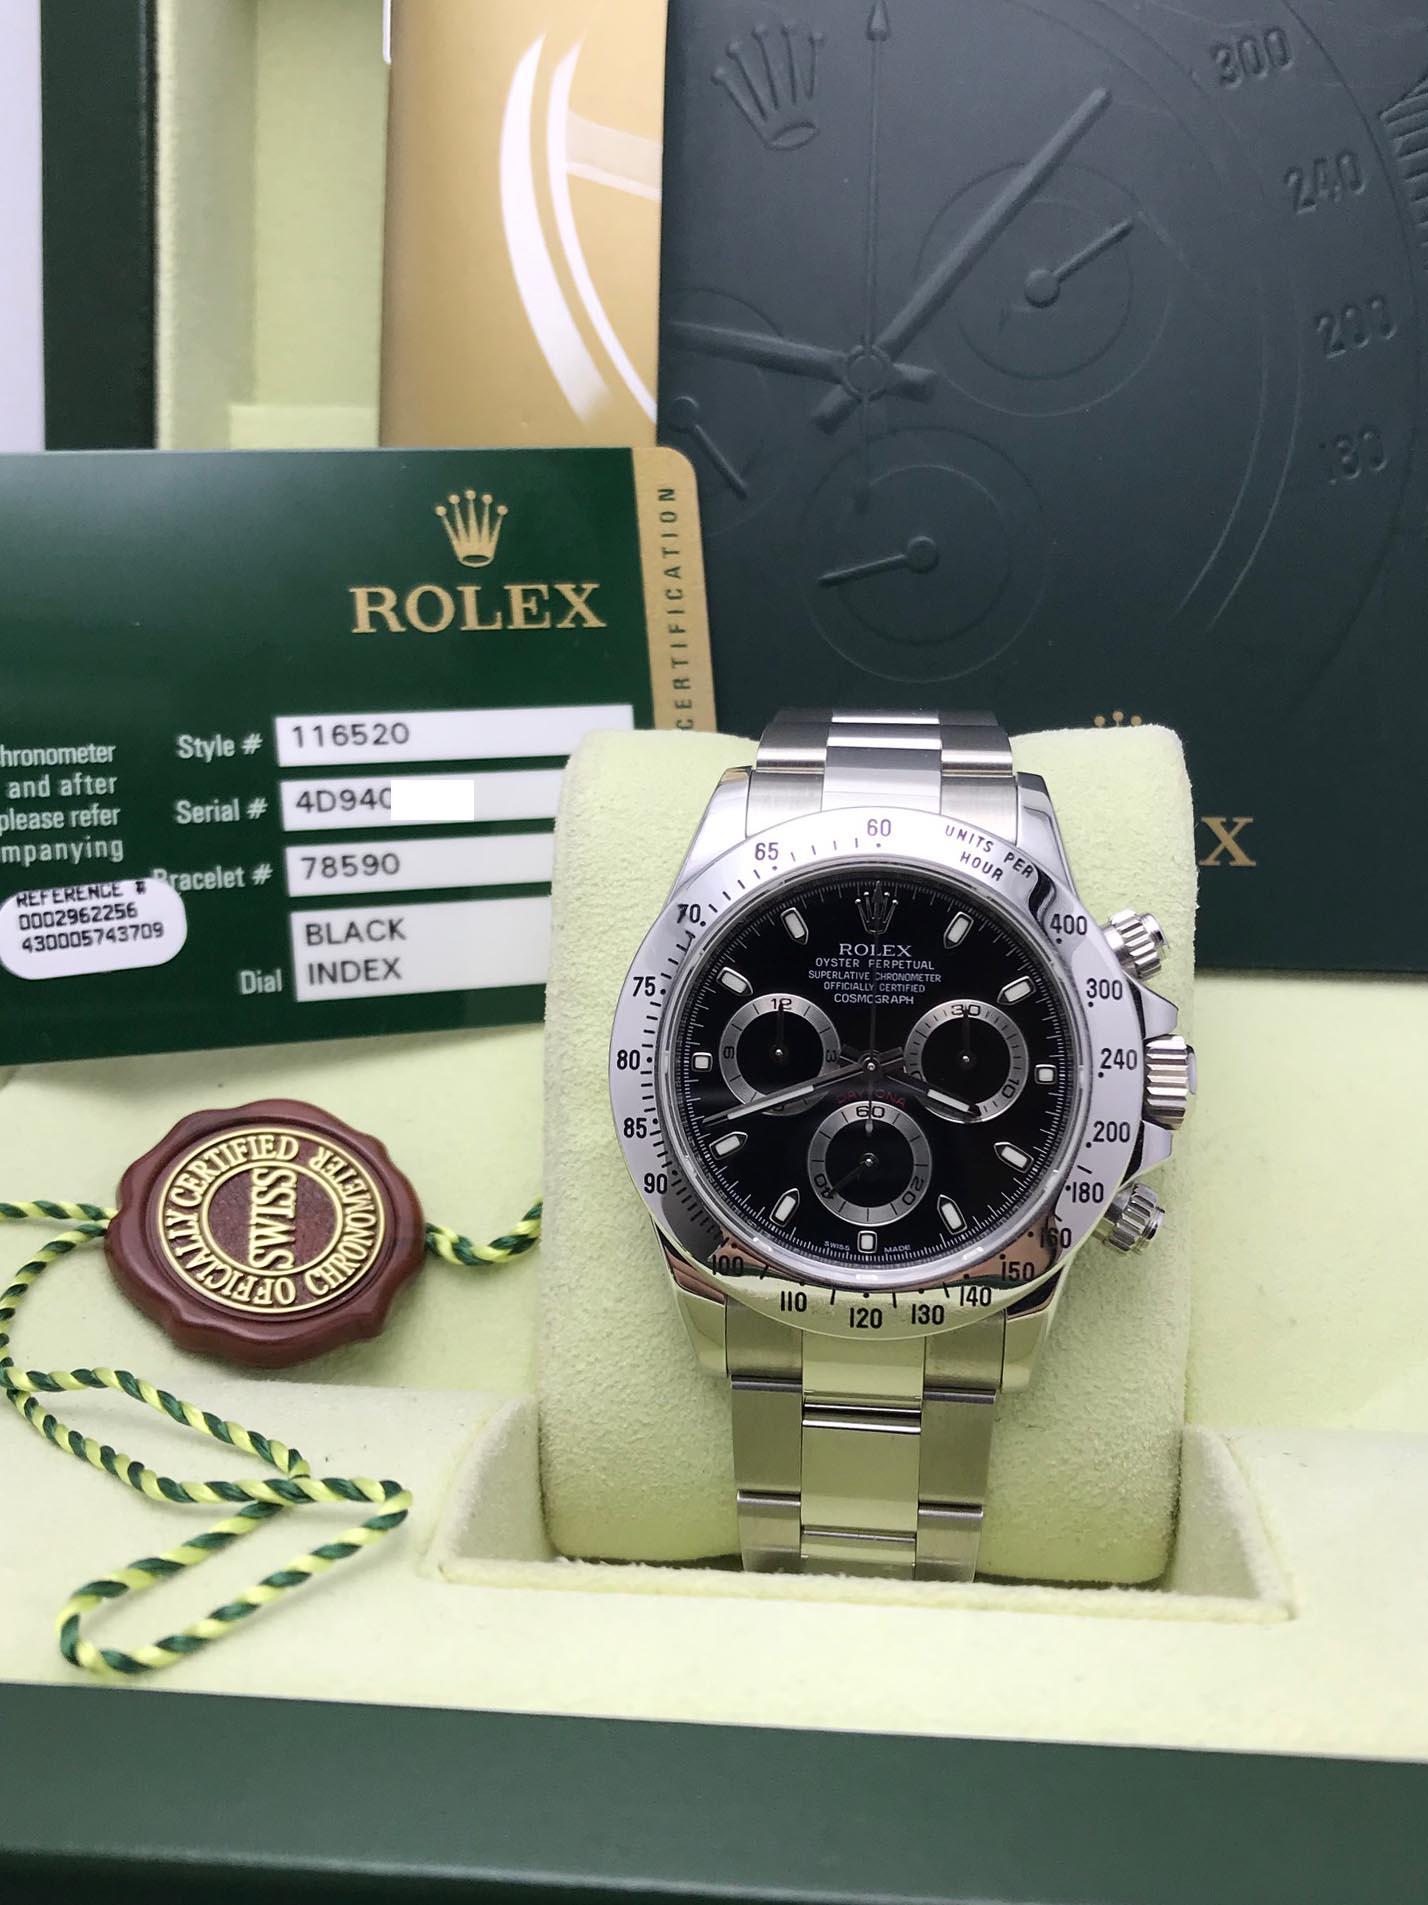 Style Number: 116520
 
Serial: 4D940***

Year: 2010
 
Model: Daytona
 
Case Material: Stainless Steel
 
Band: Stainless Steel
 
Bezel:  Stainless Steel
 
Dial: Black
 
Face: Sapphire Crystal
 
Case Size: 40mm
 
Includes: 
-Rolex Box &